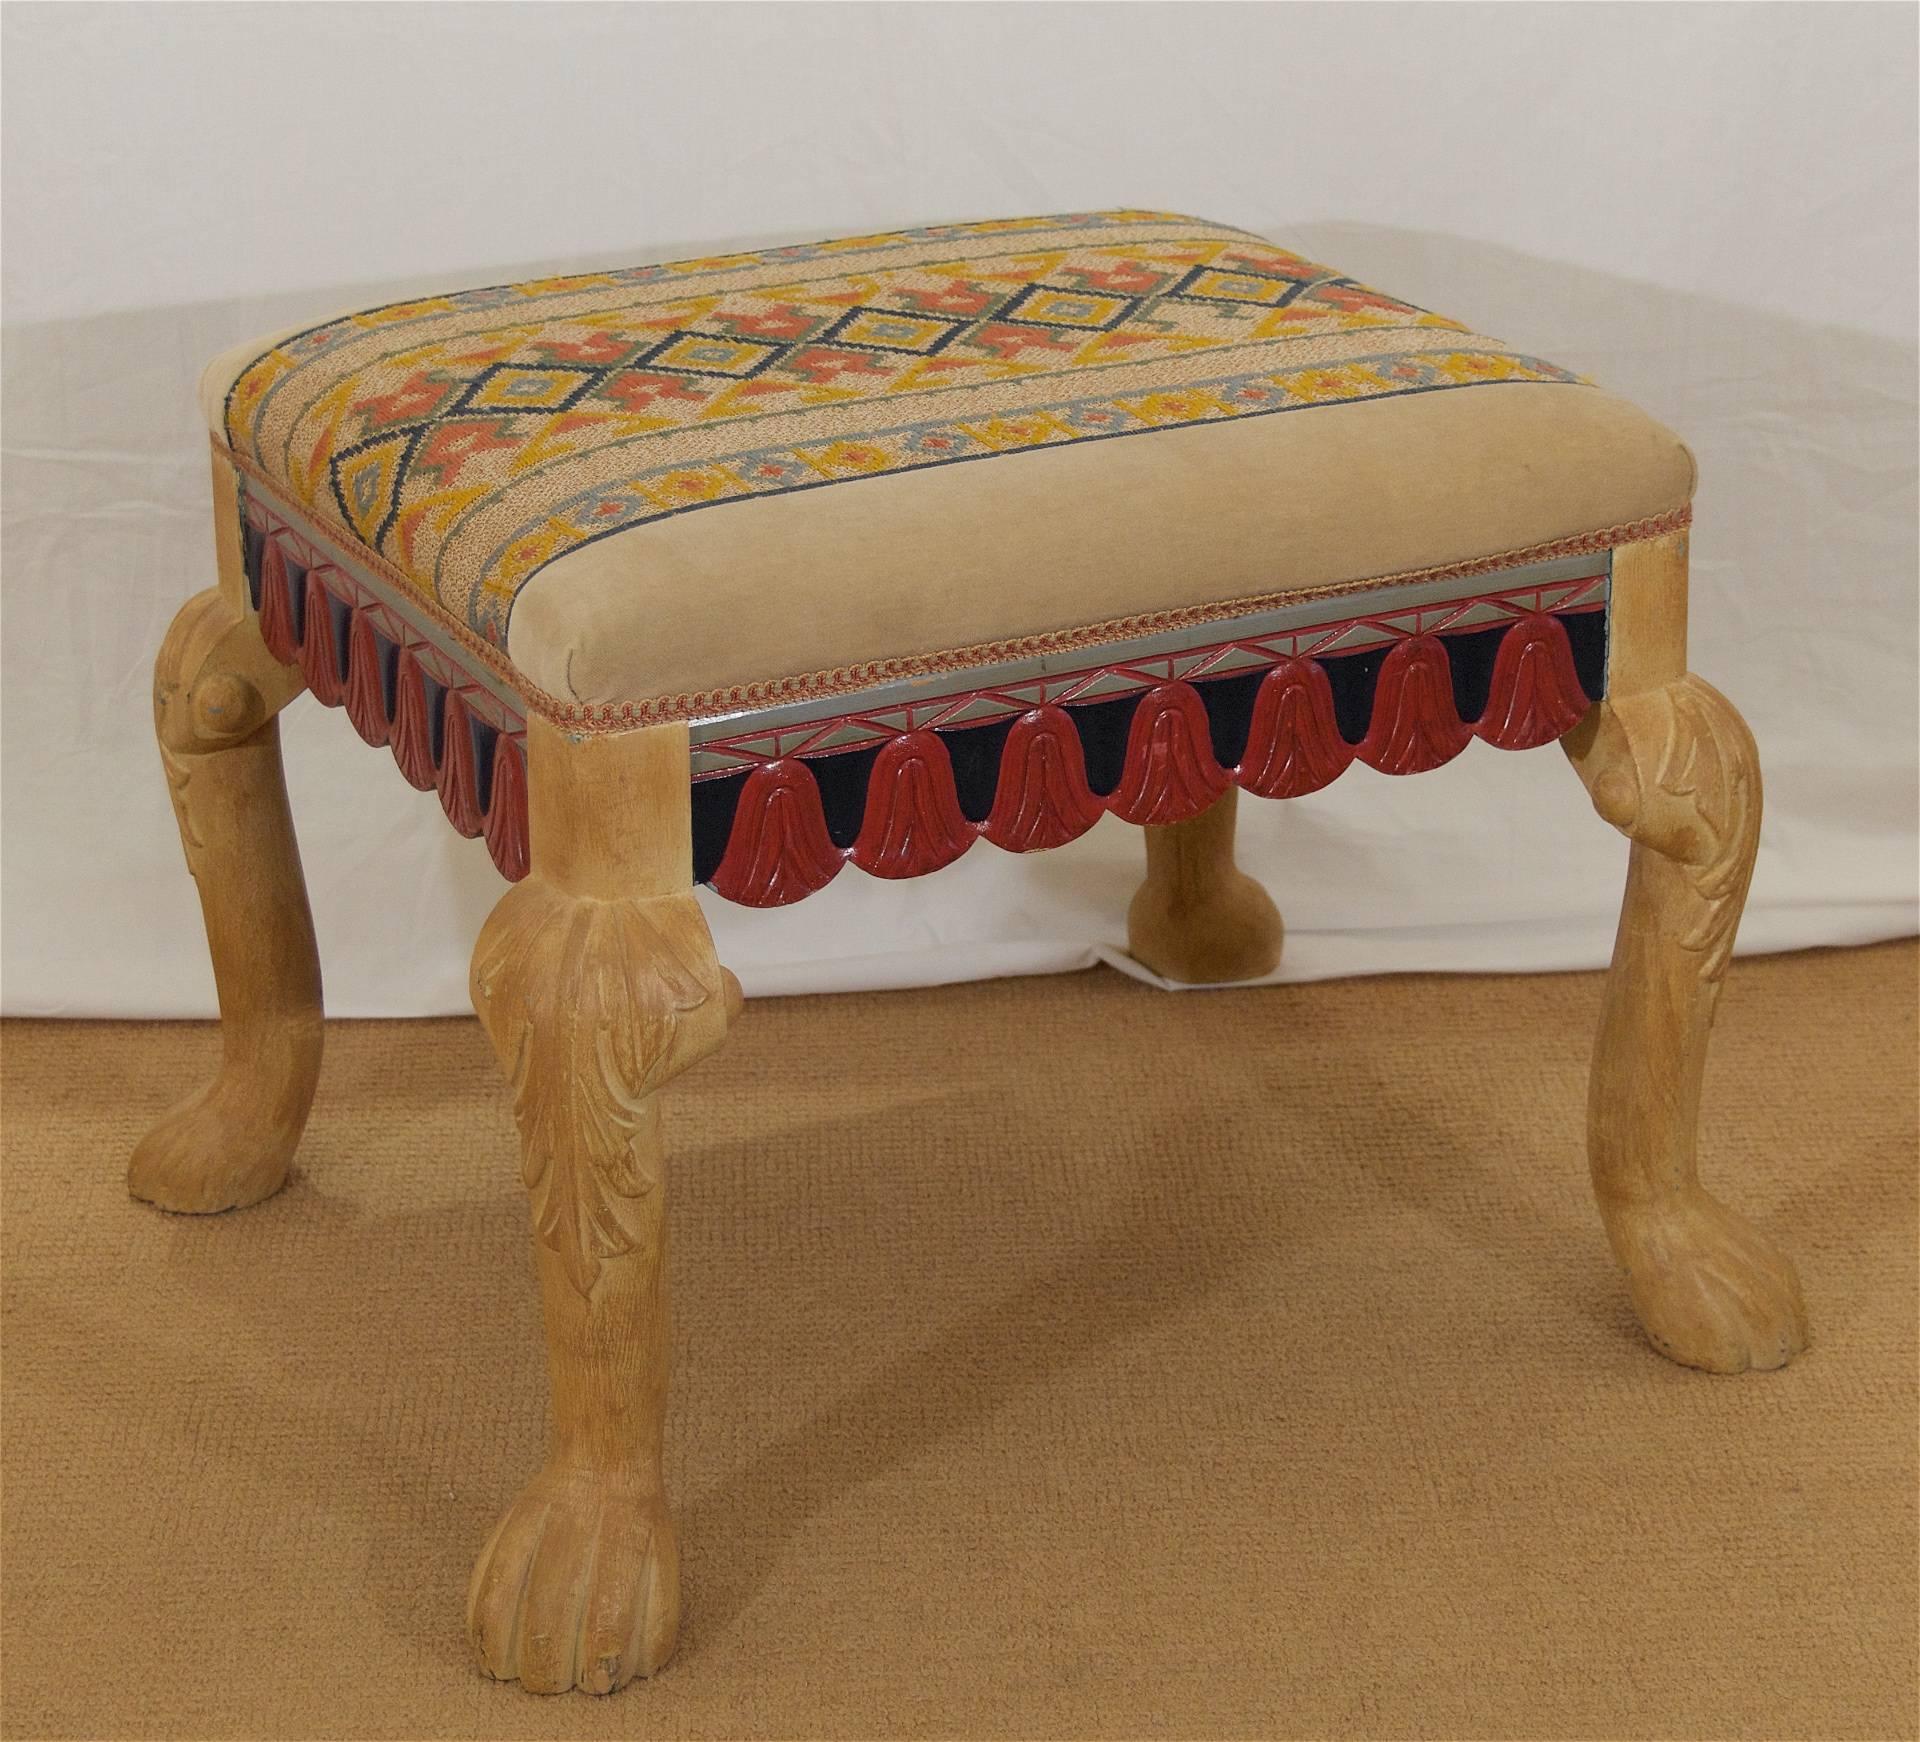 A whimsical early 20th century carved Swedish foot stool or bench, the legs in the form of lion's legs/feet, with carved tasslework on the stretchers. Painted finish in the style of cerused oak on the legs, multicolored detailing to the frame.